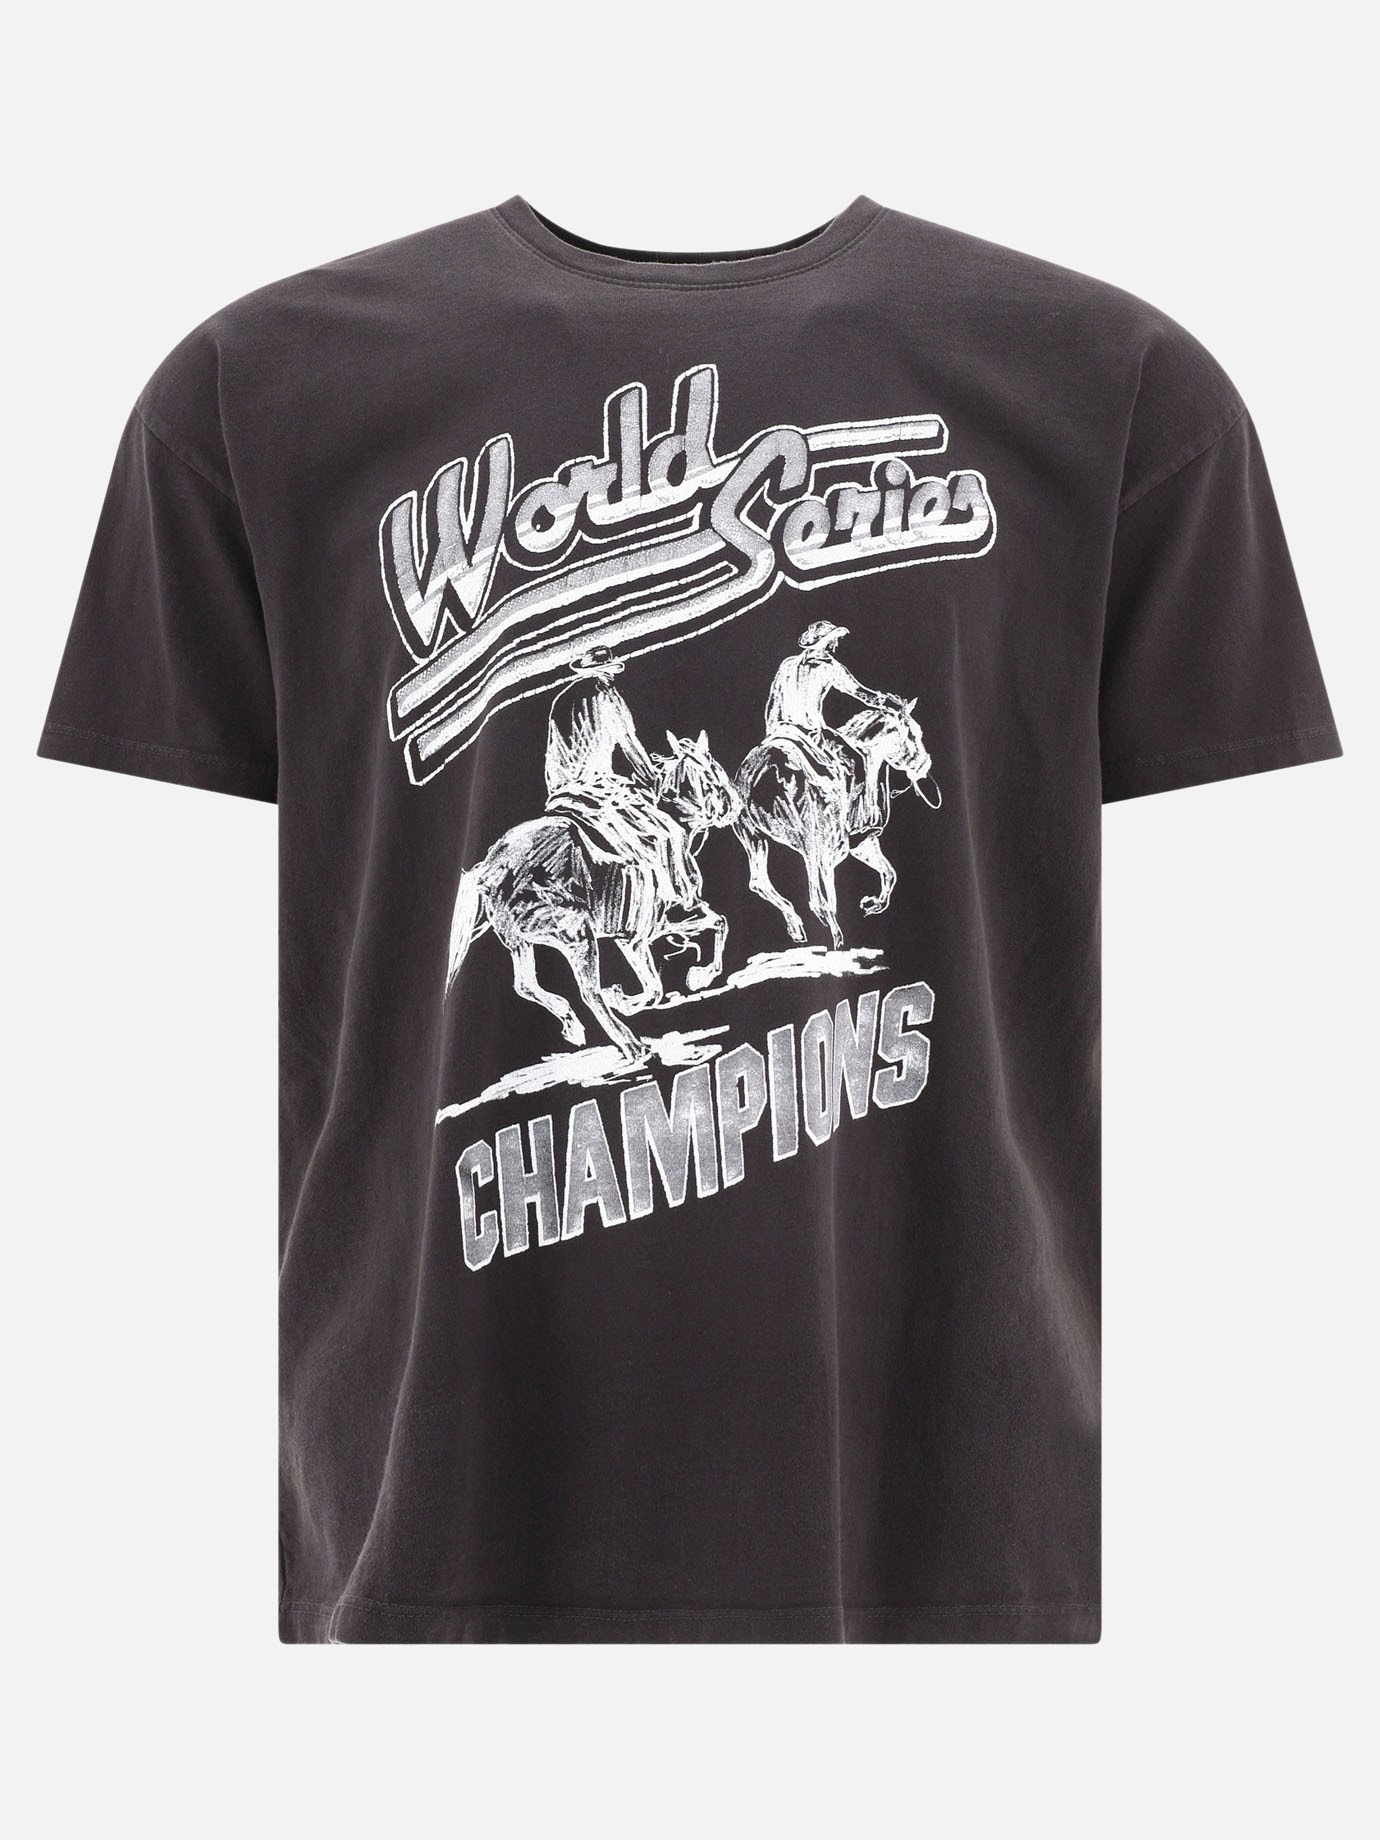 T-shirt  Worls Series Champions by One Of These Days - 5